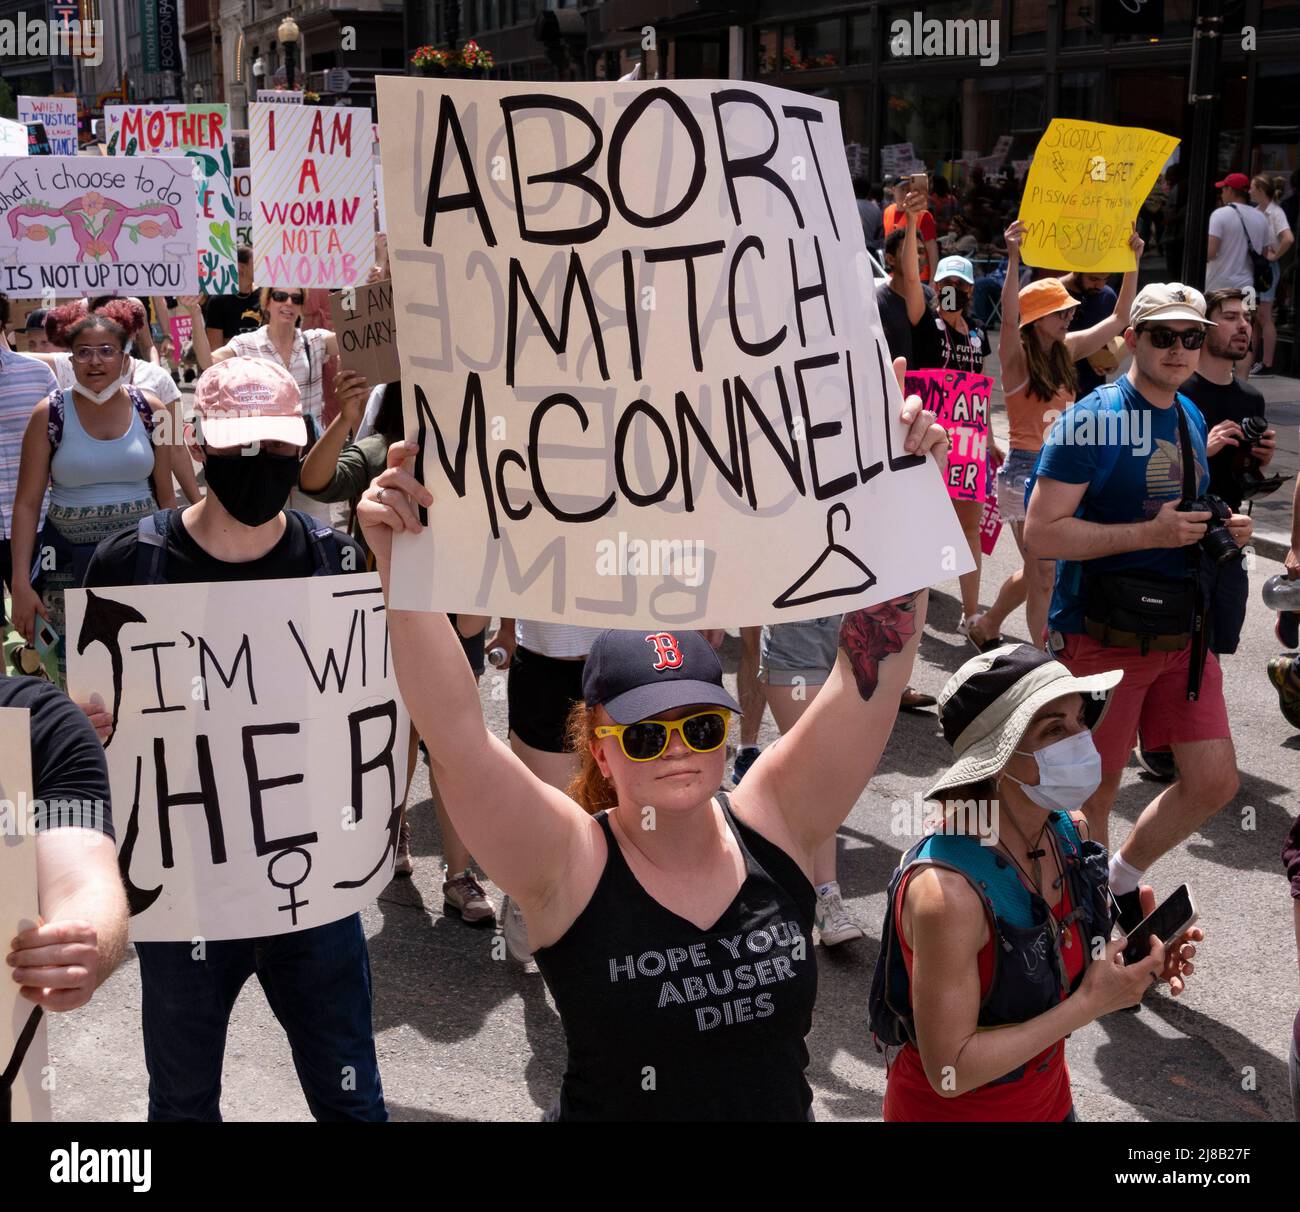 May 14, 2022, Boston, Massachusetts USA: Demonstrators march during an abortion rights protest in Boston. Demonstrators for anti abortion ban are rallying across the country in the face of an anticipated Supreme Court decision that could overturn womens right to an abortion. Credit: Keiko Hiromi/AFLO/Alamy Live News Stock Photo